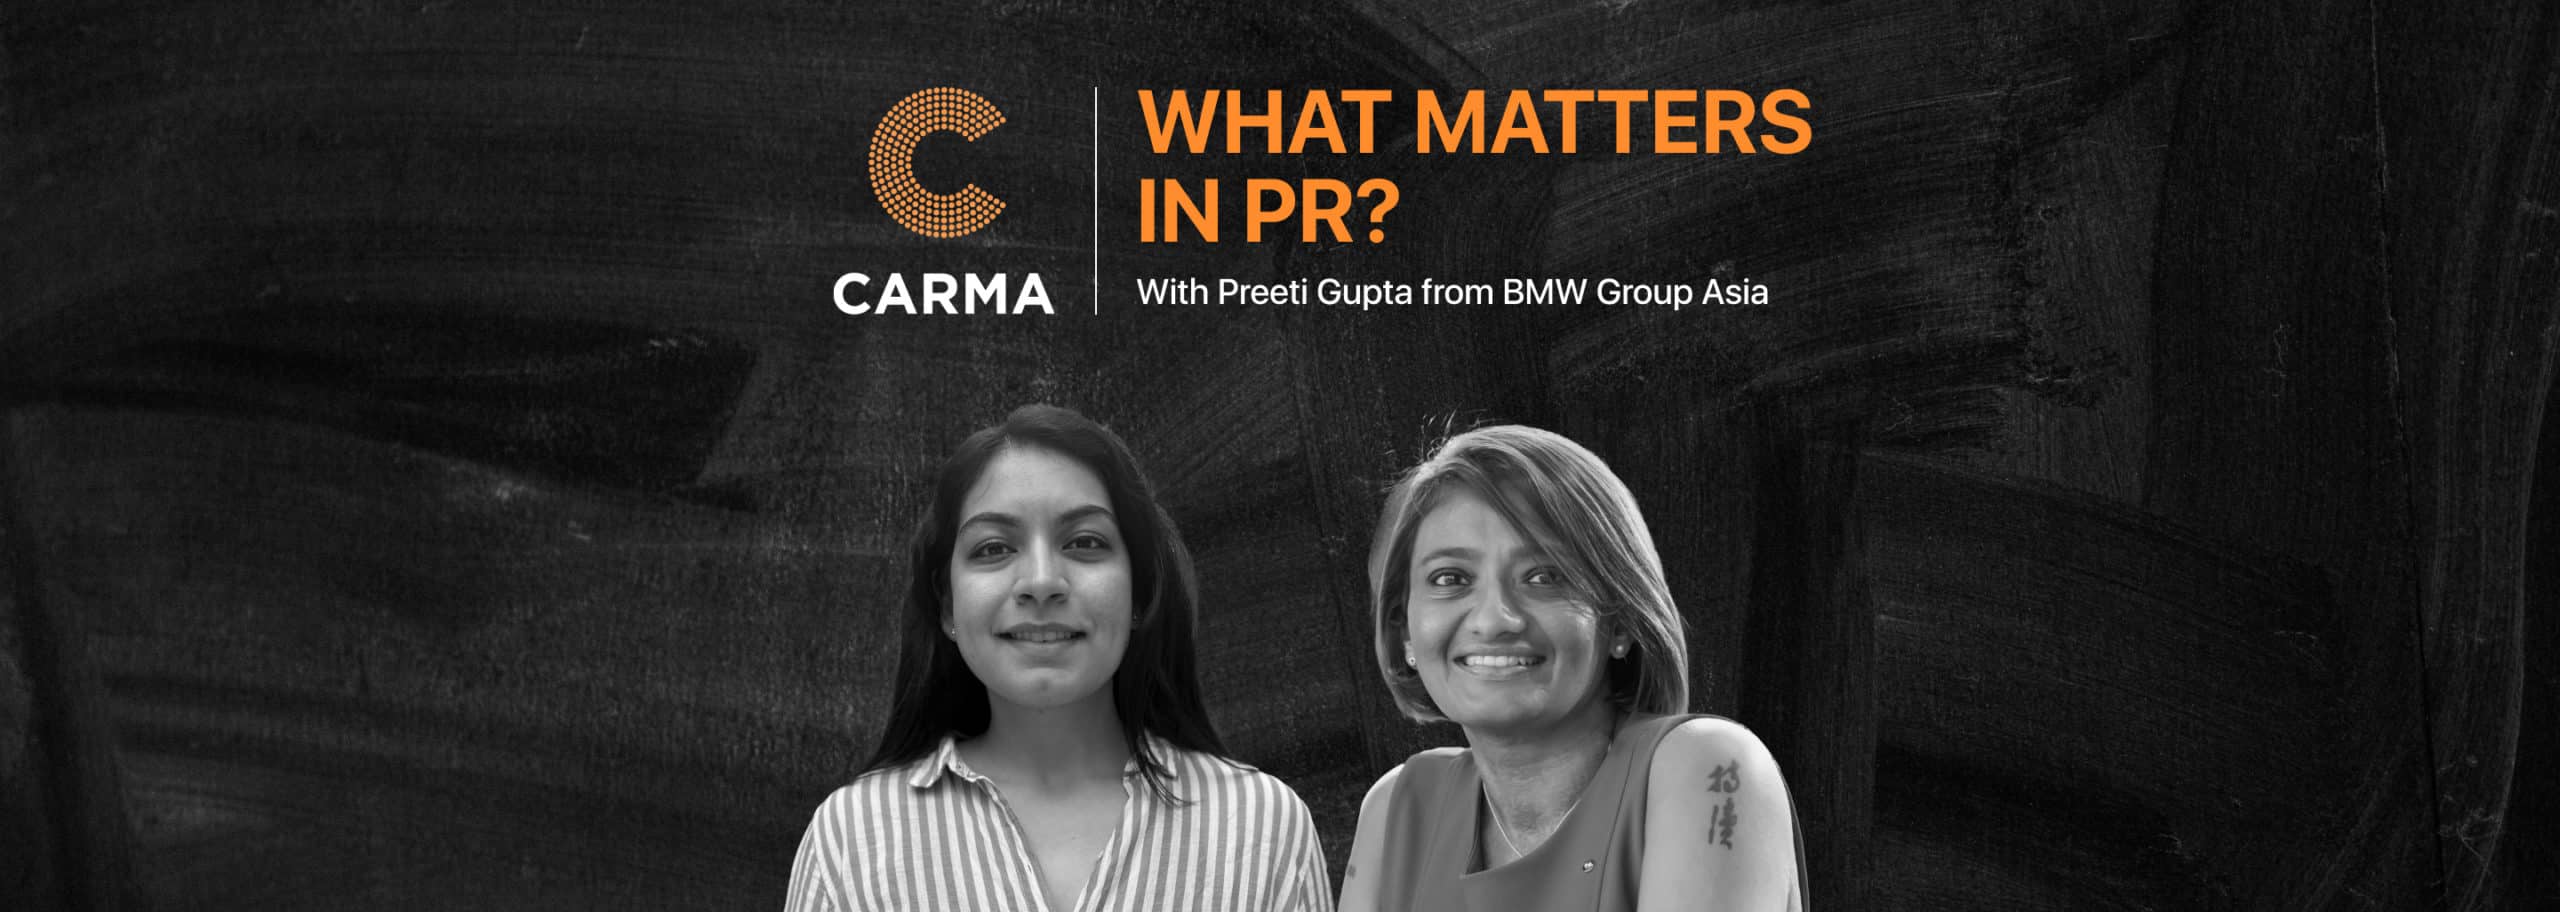 What Matters in PR - BMW Group Asia